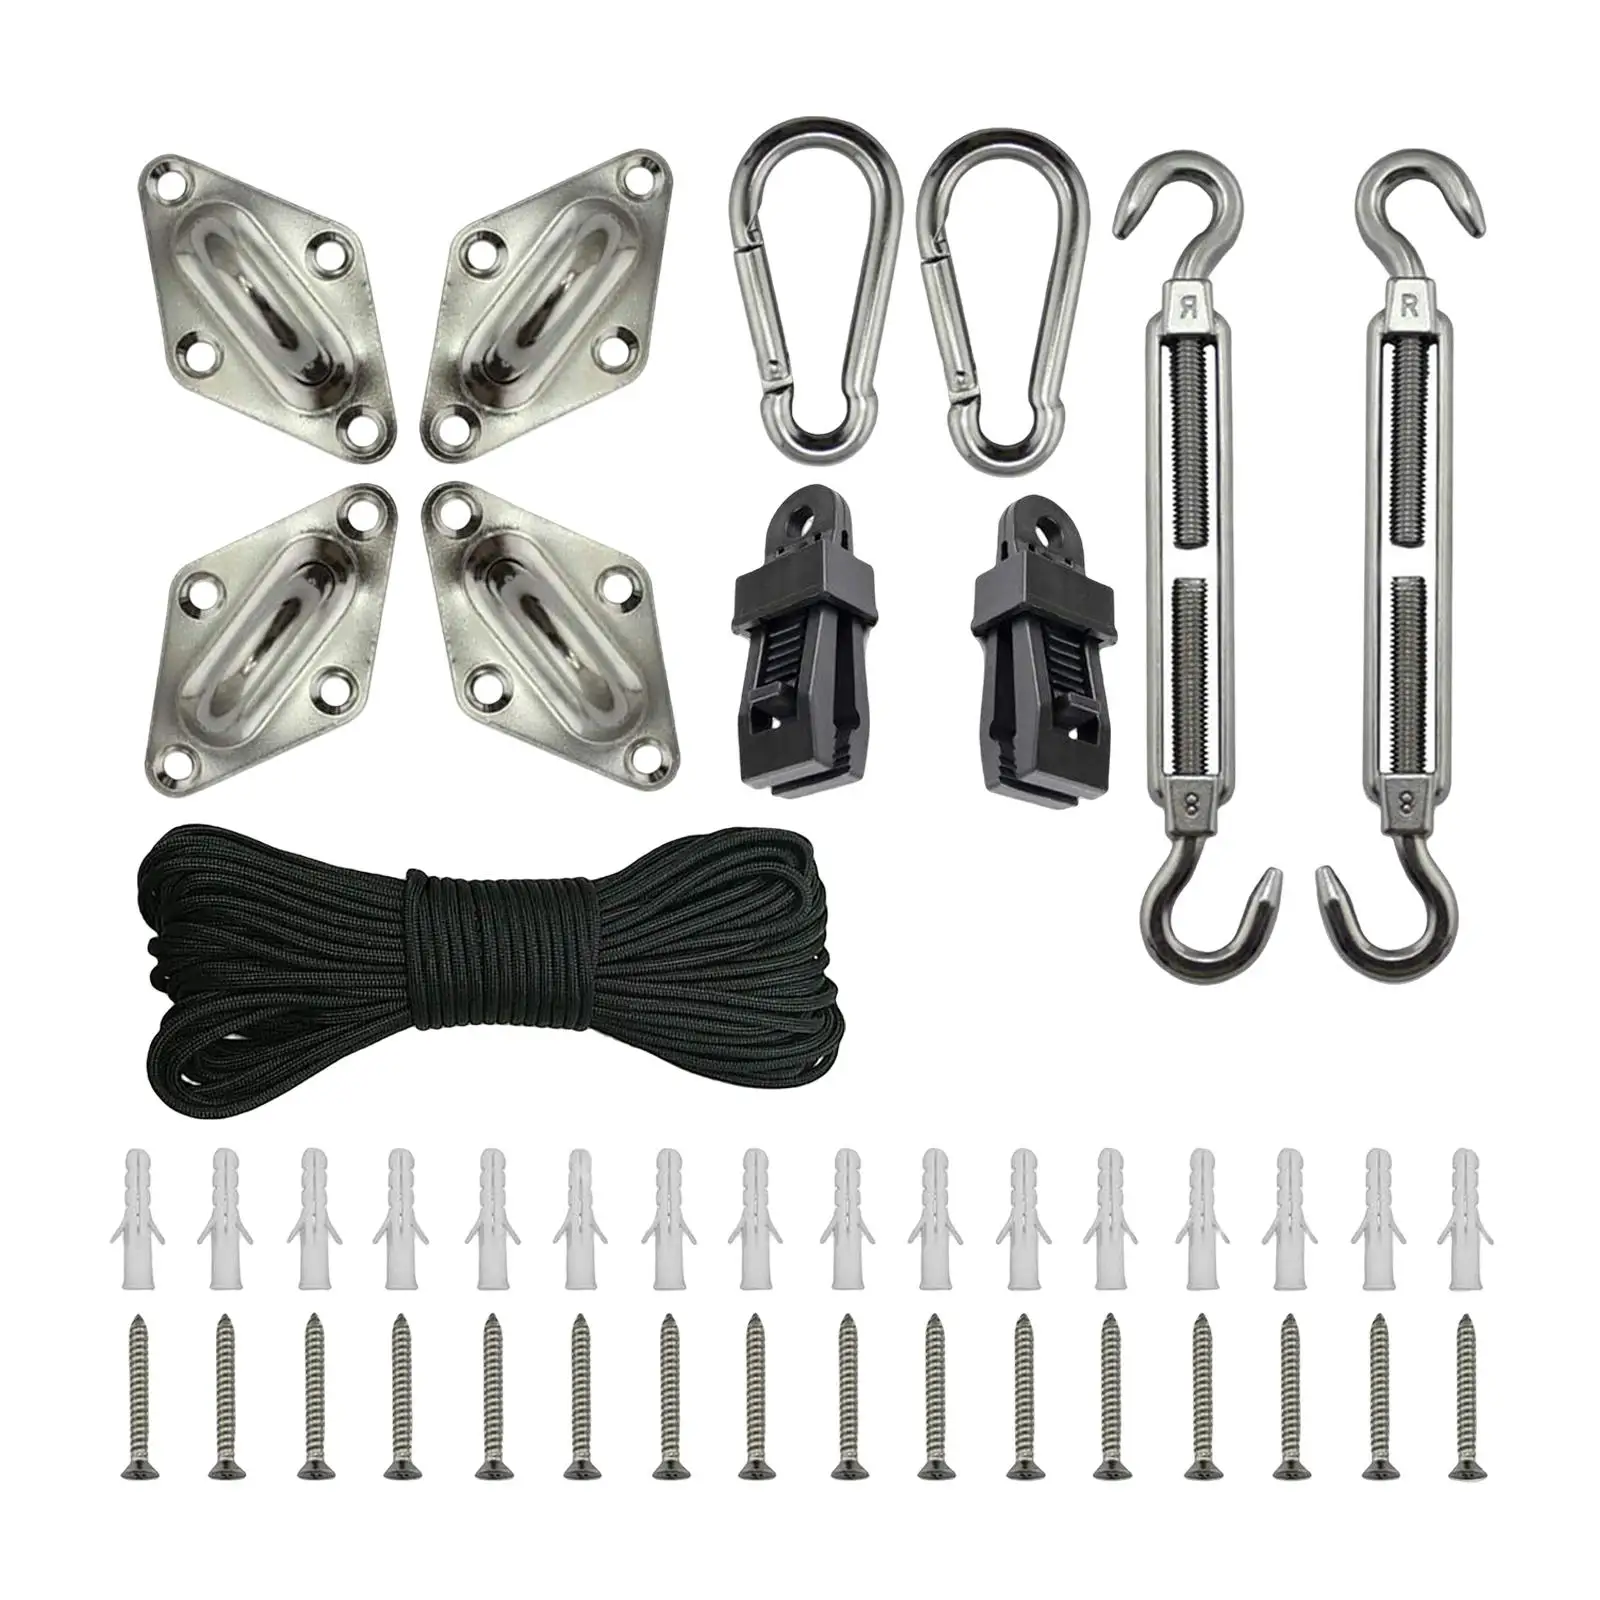 shade sail Hardware Kit 43 Pieces for Garden, Trees, Wall, Porch Metal Material Durable Sturdy Outdoor with 10M Rope